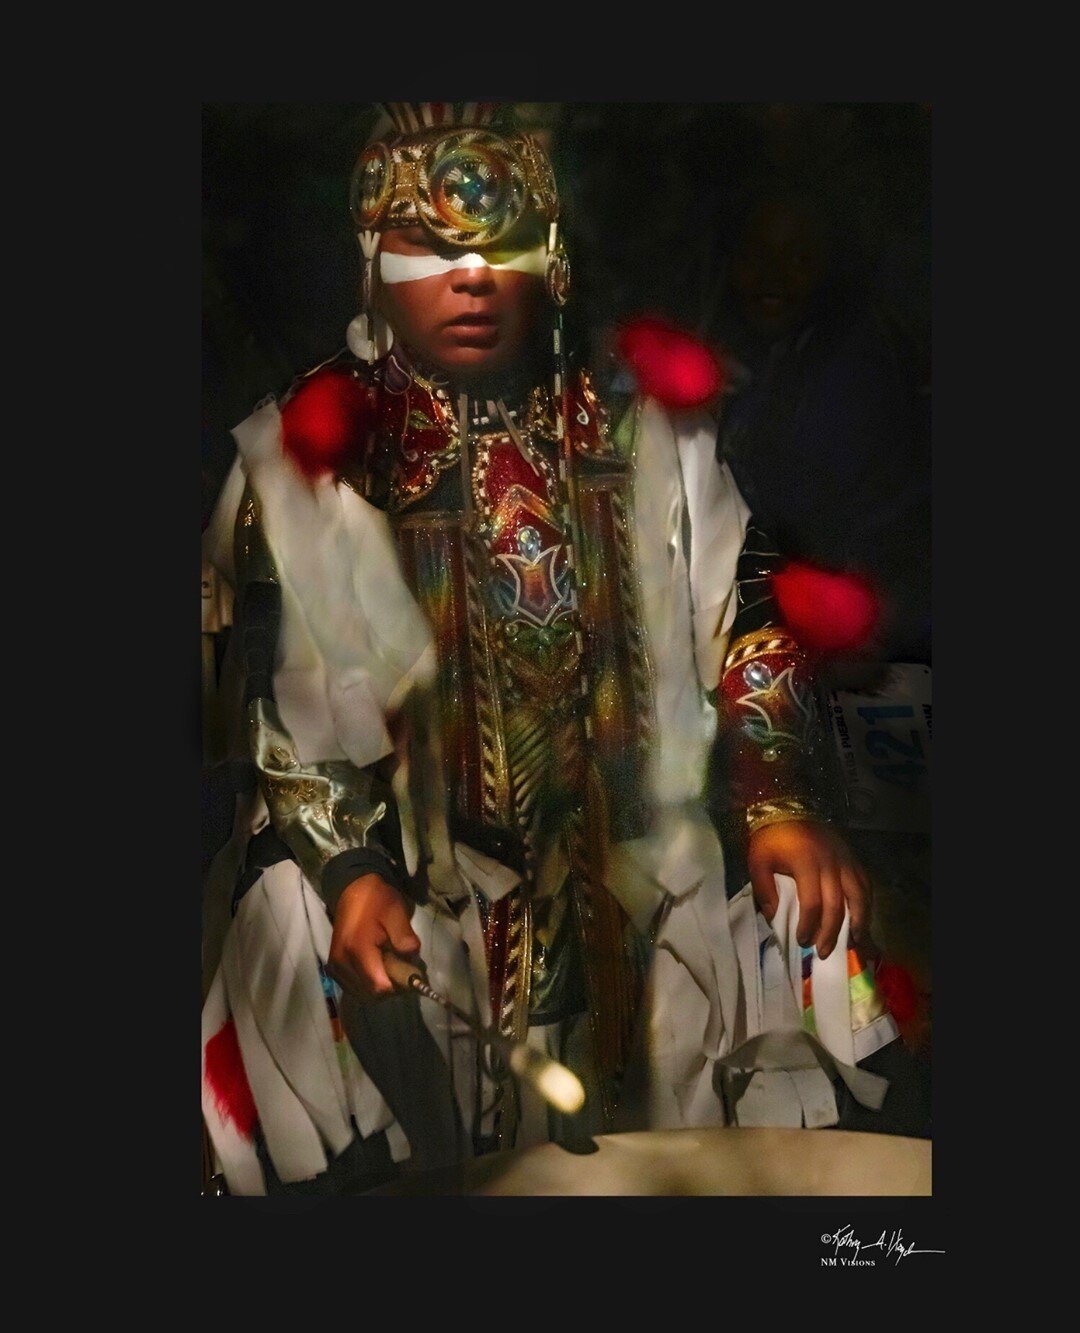 Night Drummer, another image that is part of the Western Gallery/Taos Arts Council show debuting online tomorrow, Nov 13th through Jan 5th.  Image taken at 2019 Taos Pueblo Pow Wow (as official photographer). Archival print on canvas.  Go to Western 